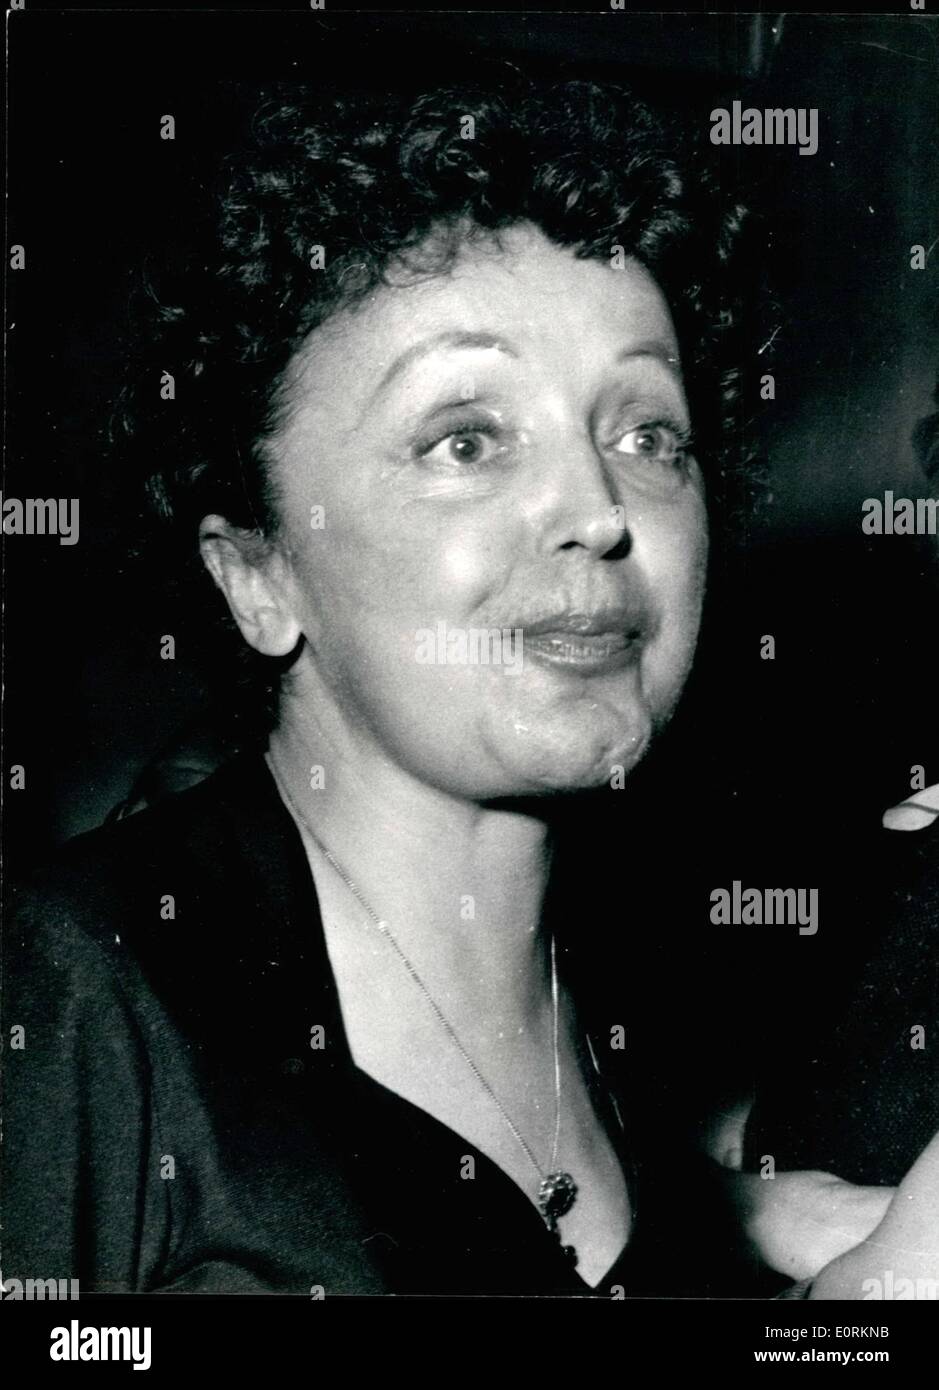 Jan. 01, 1960 - Edith Piaf Seriously Ill: Edith Piaf, the famous singer in Treatment in a Paris Clinic, was given a Blood Transfusion. She is suffering from Jaundice and general weakness. Photo Shows A recent portrait of Edith Piaf. Stock Photo